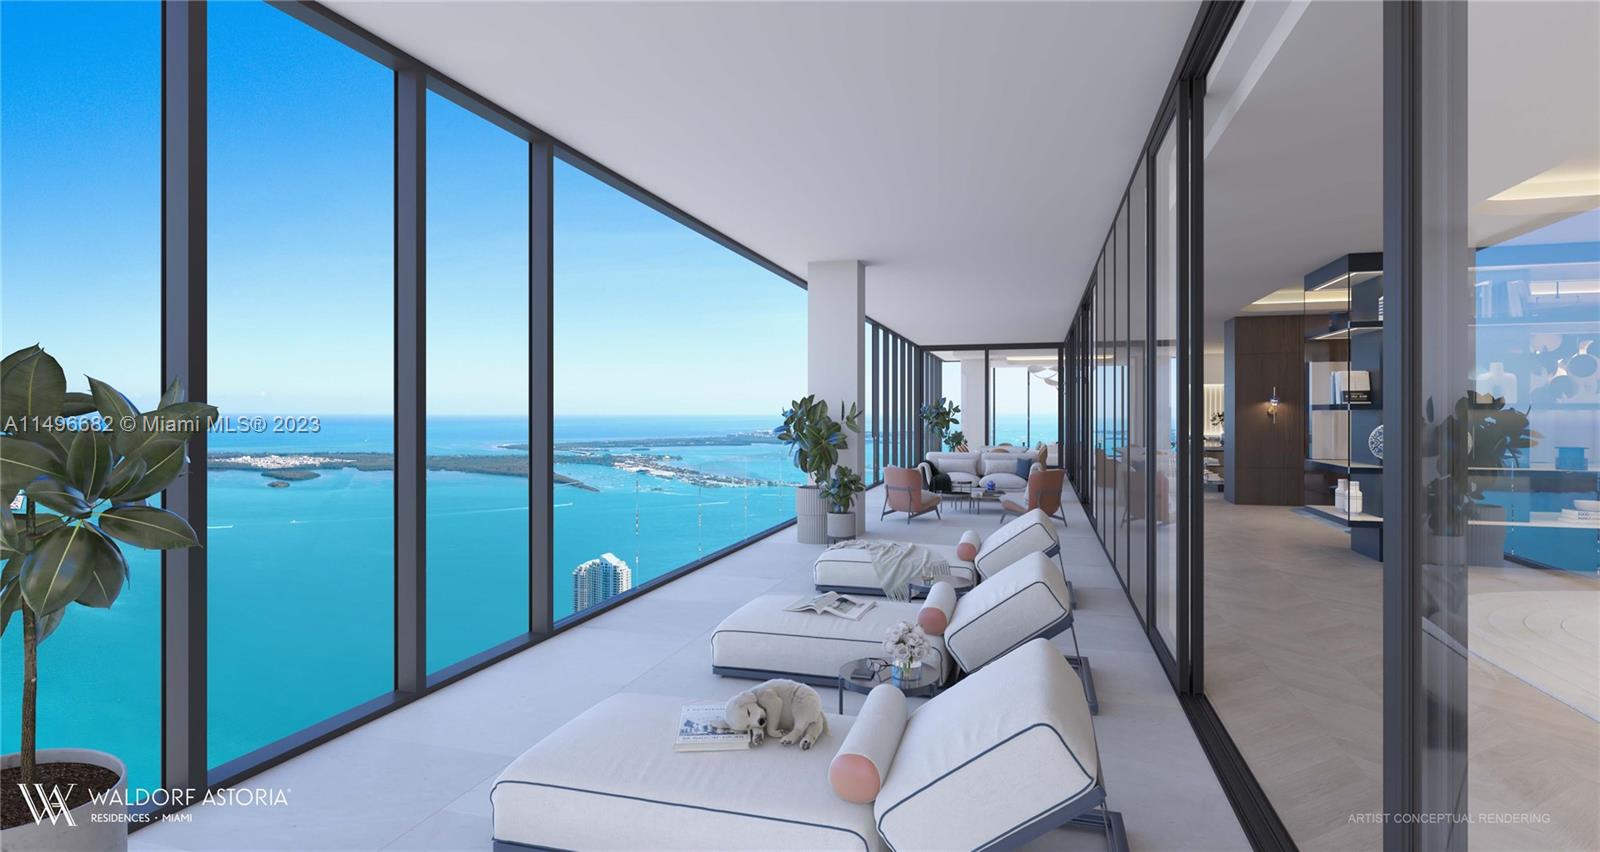 A Legacy Penthouse.  Nestled atop Miami's most iconic tower sits the limited penthouse collection at Waldorf Astoria.  Theses residences are completely adorned with the most pristine and luxurious touches synonymous with Waldorf Astoria's legacy.  Every detail has been reimagined for a home that exceeds even the highest of expectations.